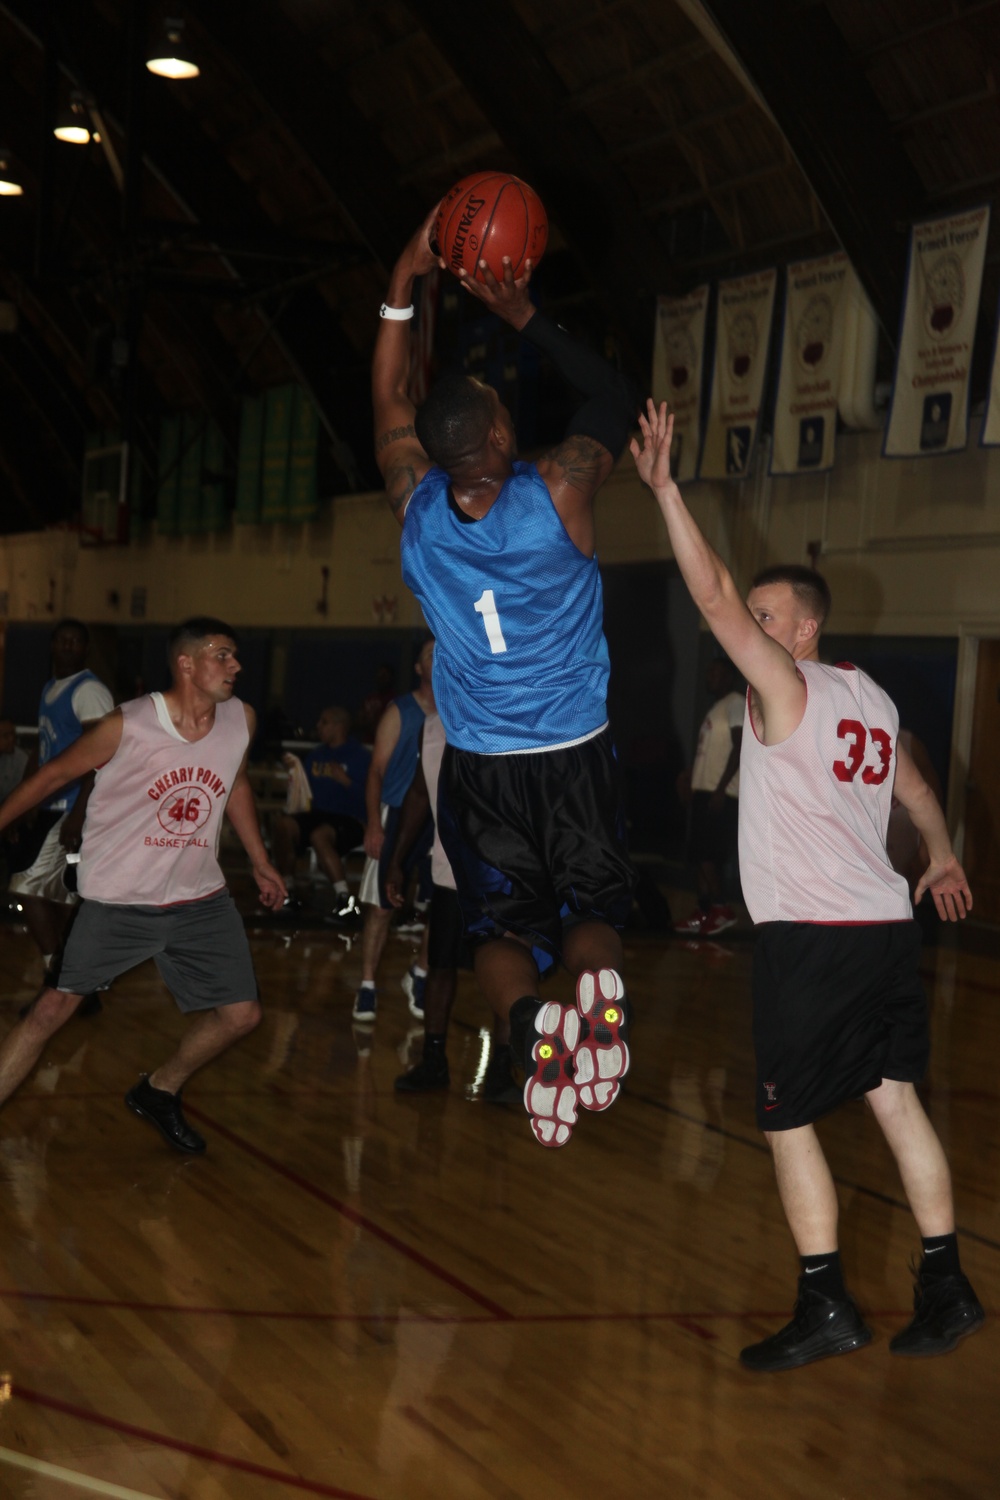 New courts, new season: Intramural basketball continues on new court